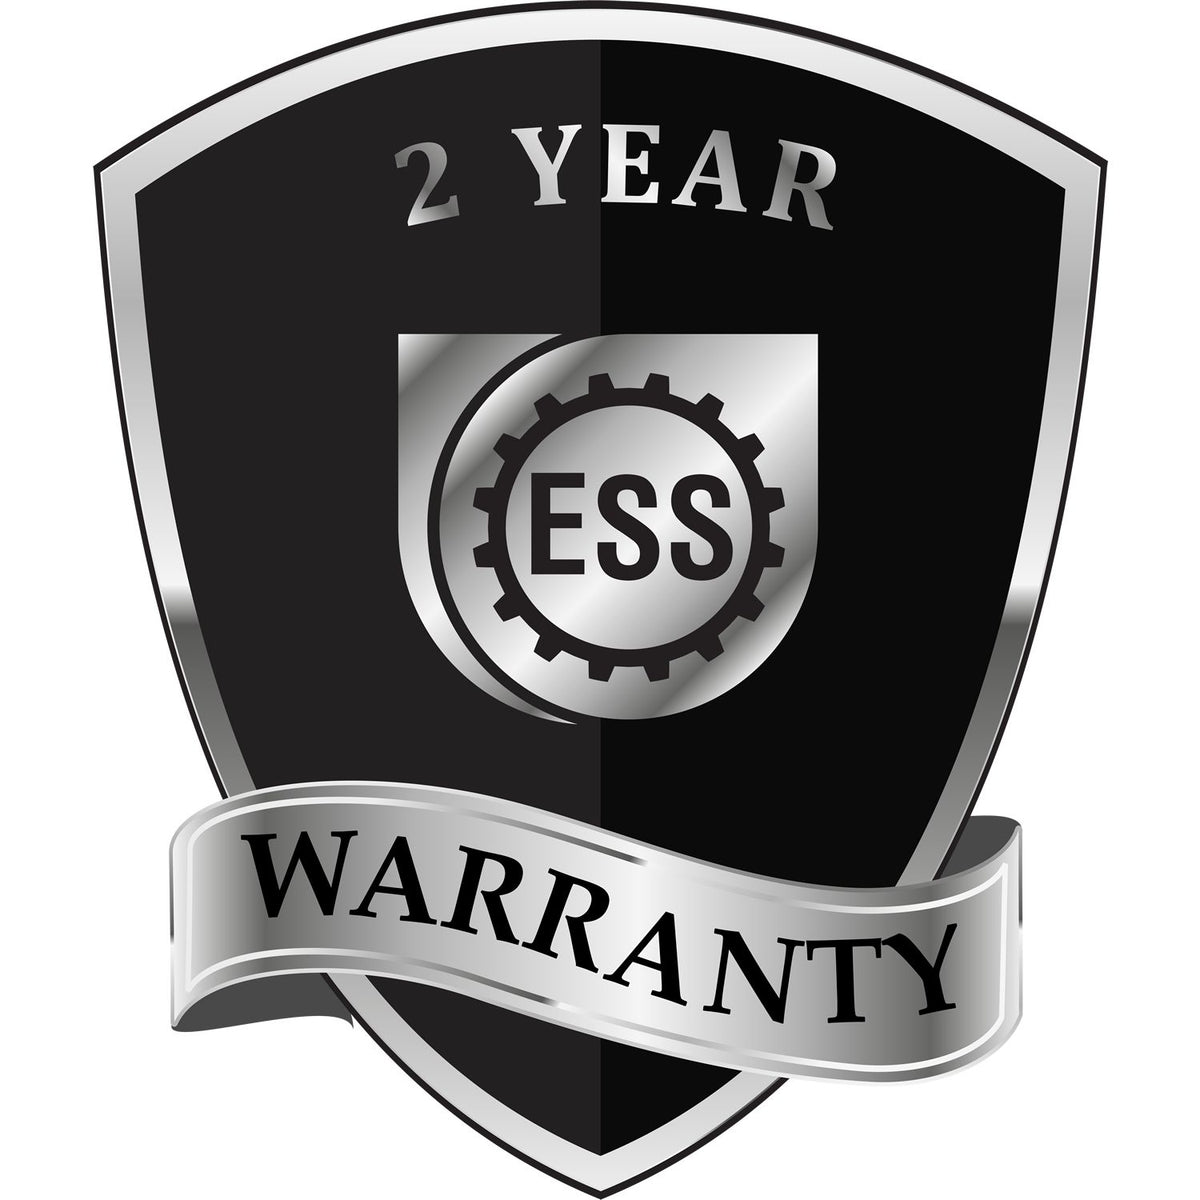 A black and silver badge or emblem showing warranty information for the Soft Pennsylvania Professional Geologist Seal